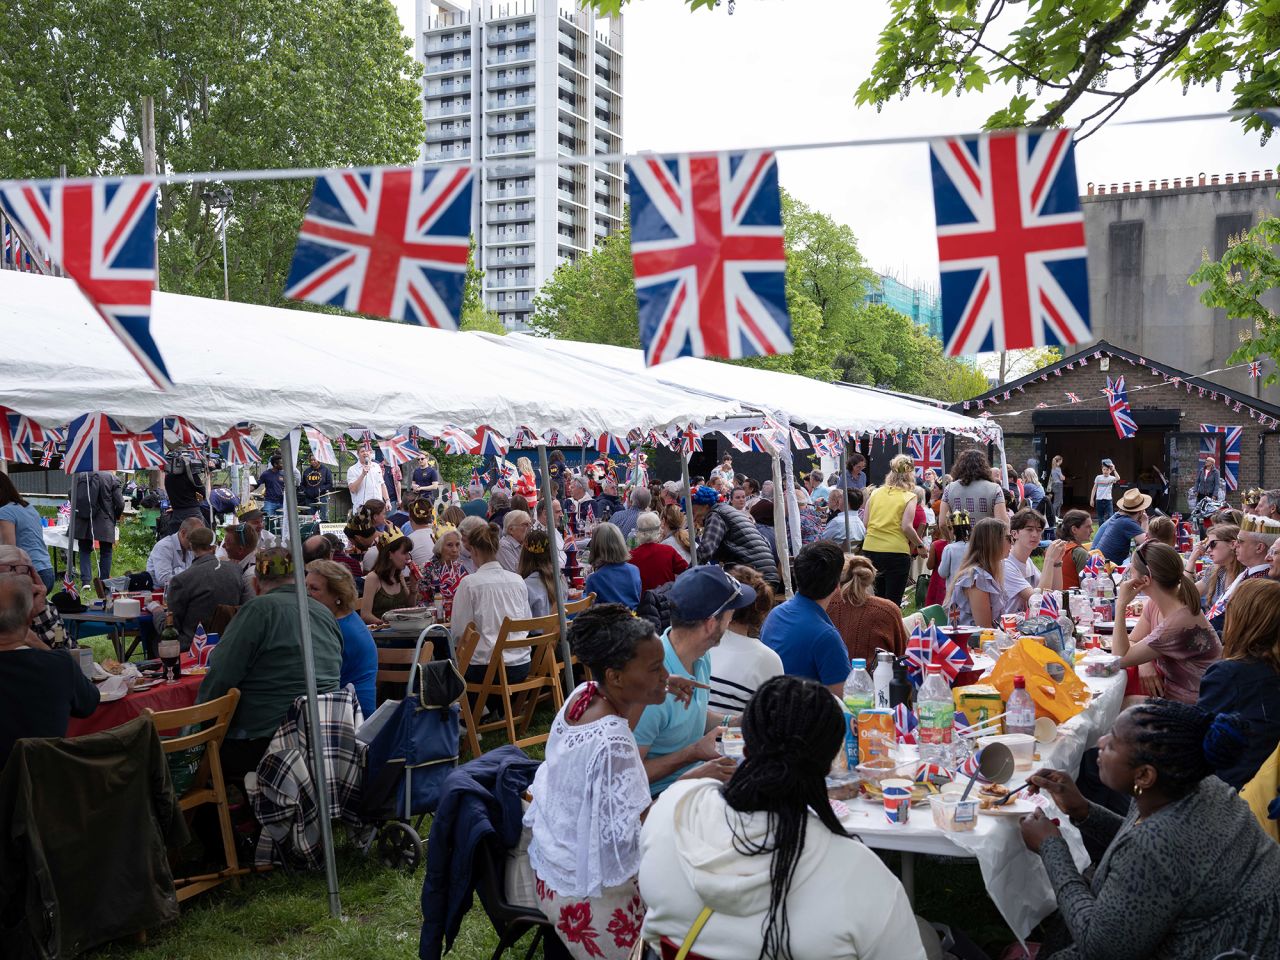 Communities across the United Kingdom held street parties on Sunday in honor of the King's coronation.